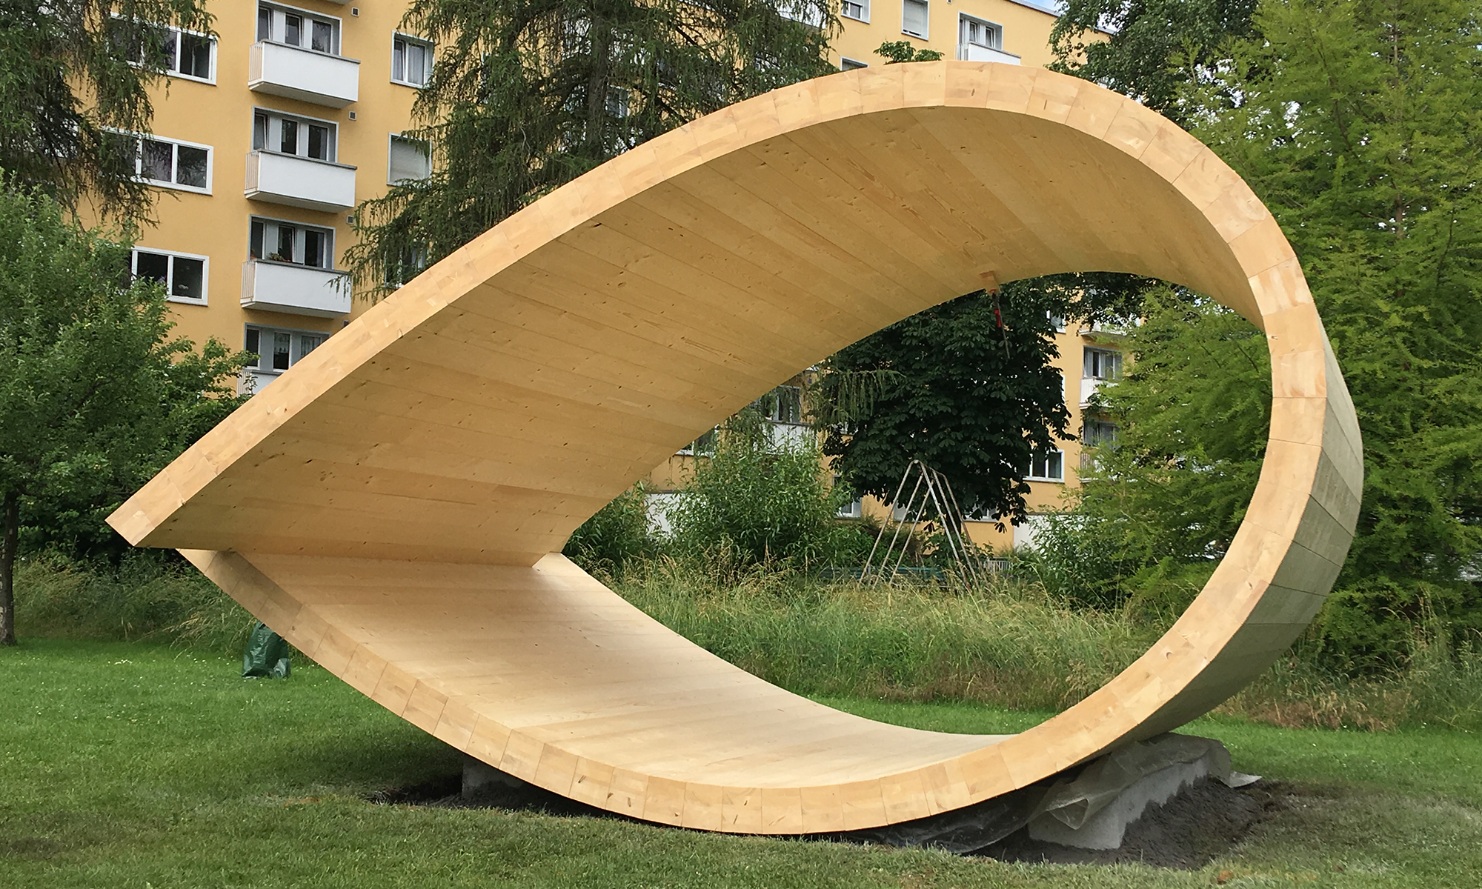 The sound space pavilion is a sculpture in the shape of a loop made of wood. It is located in a park in Zurich.